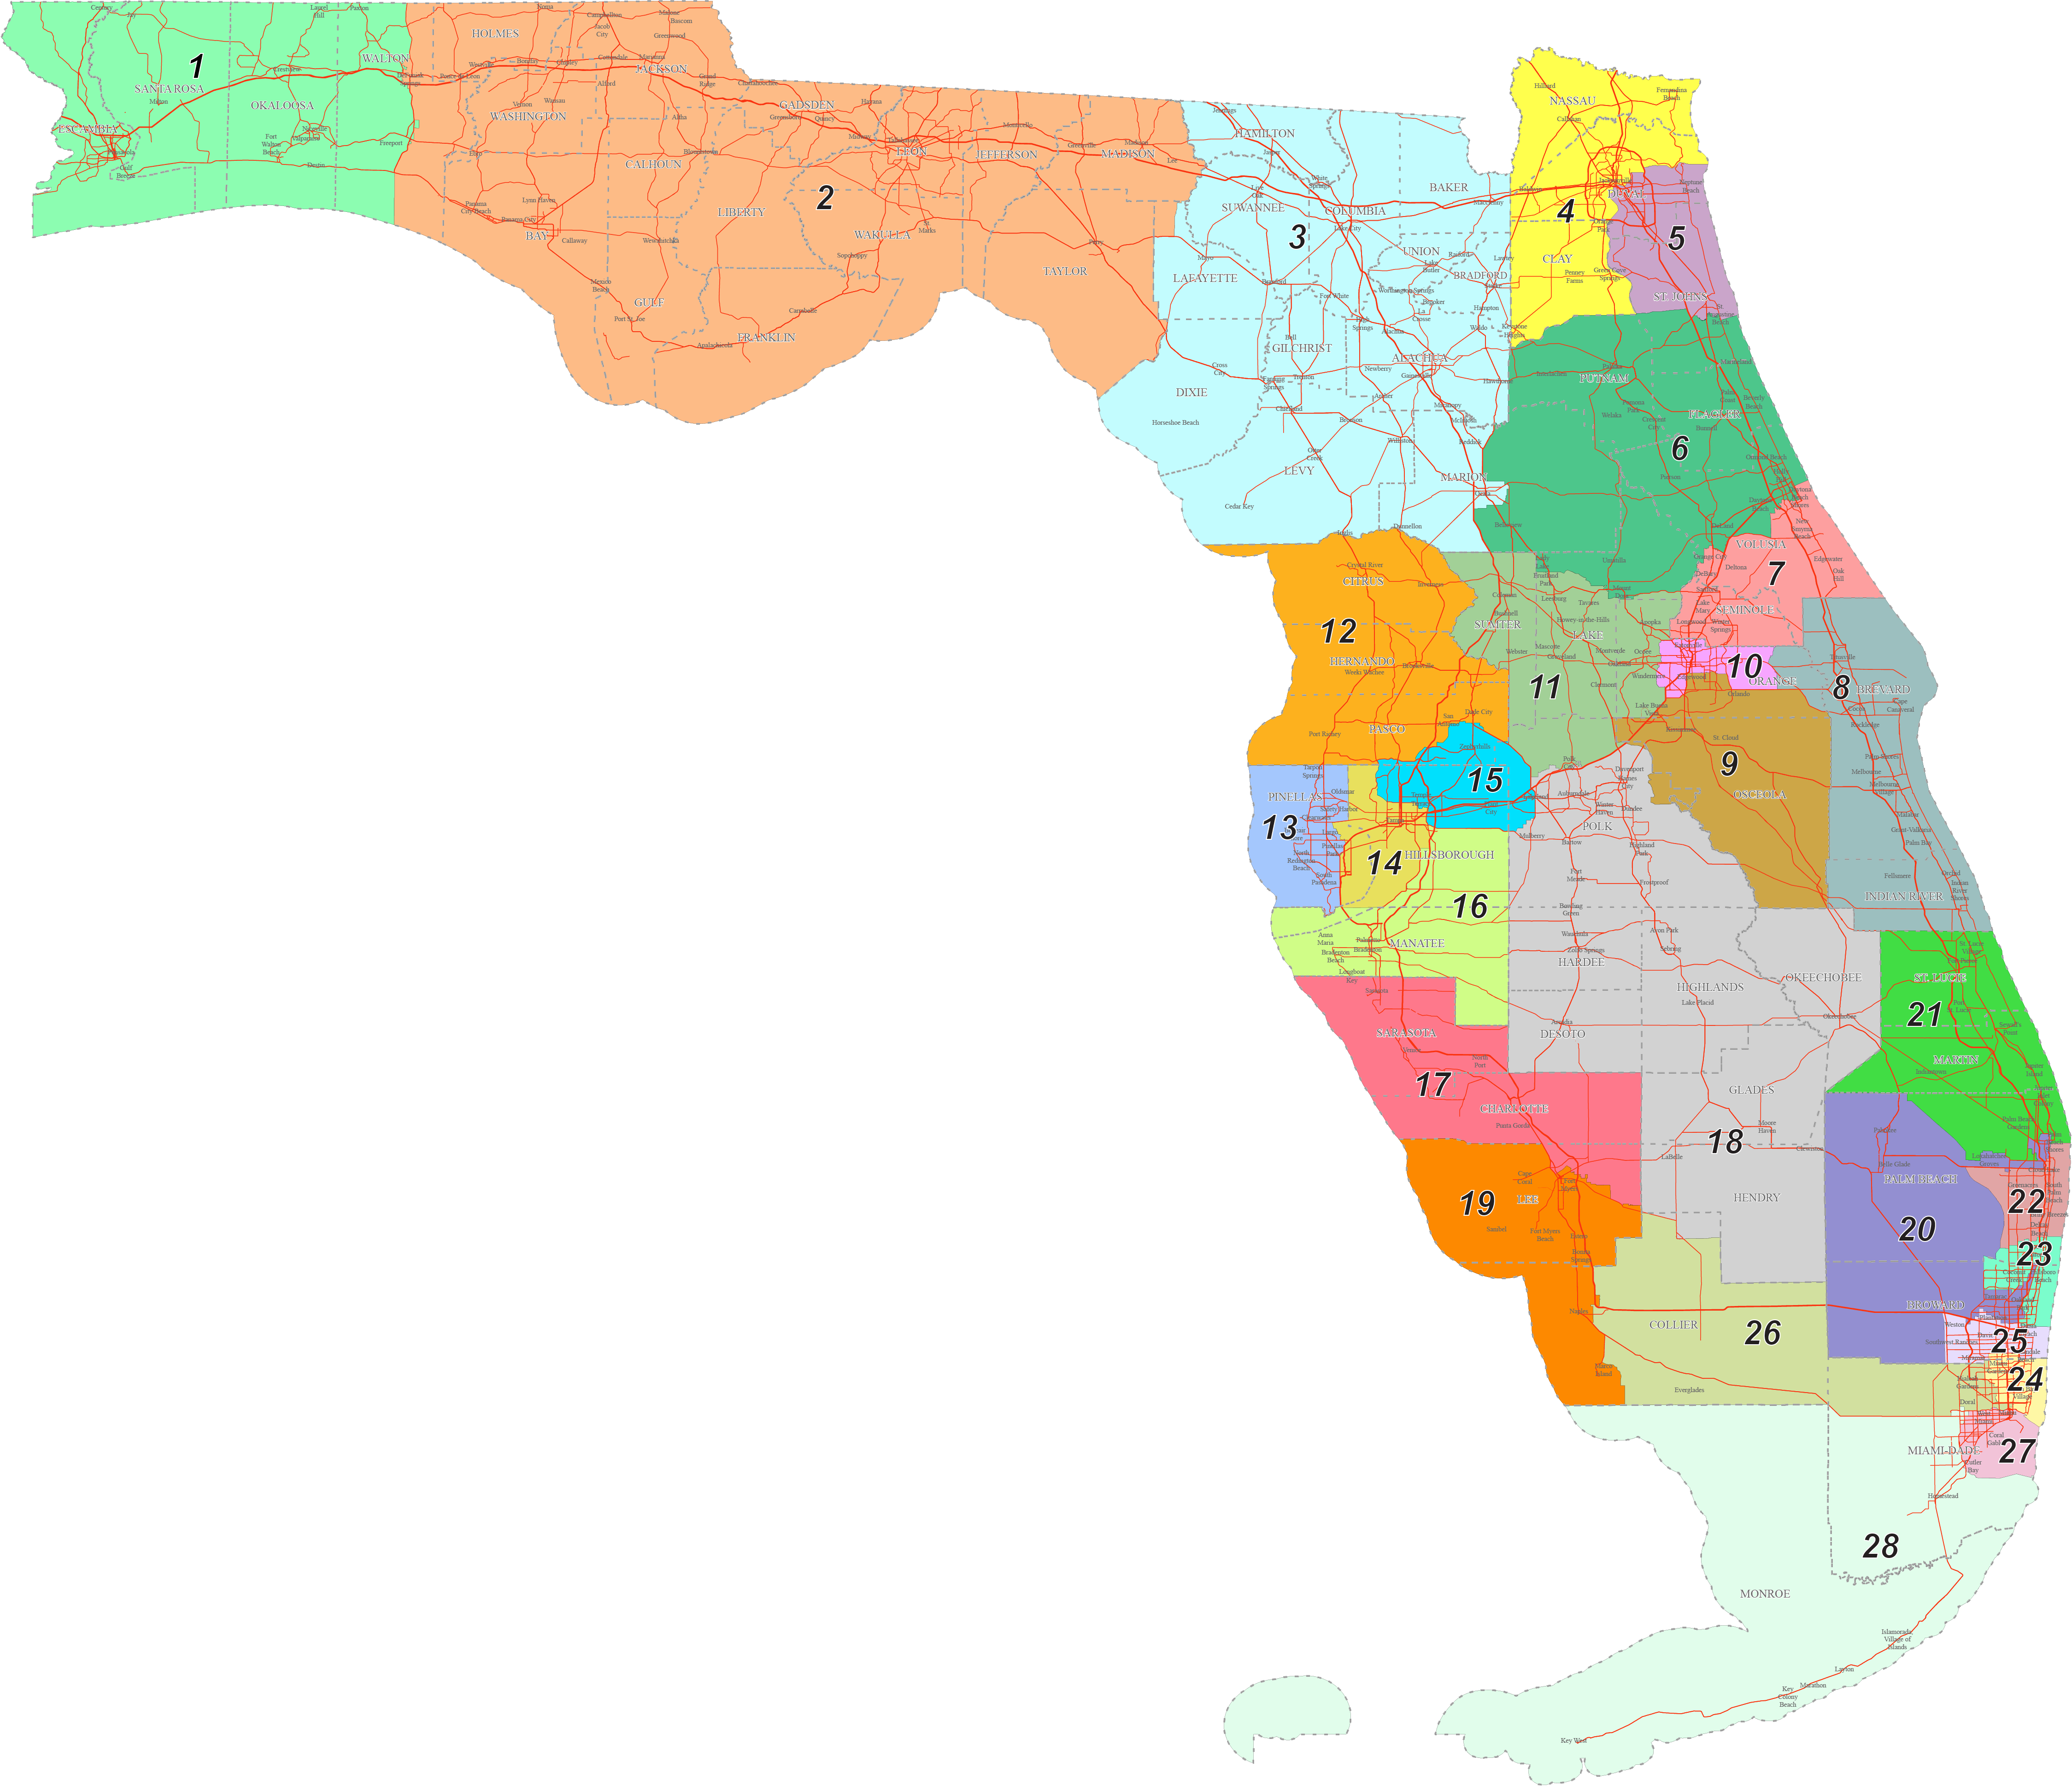 click to see larger map of congressional districts